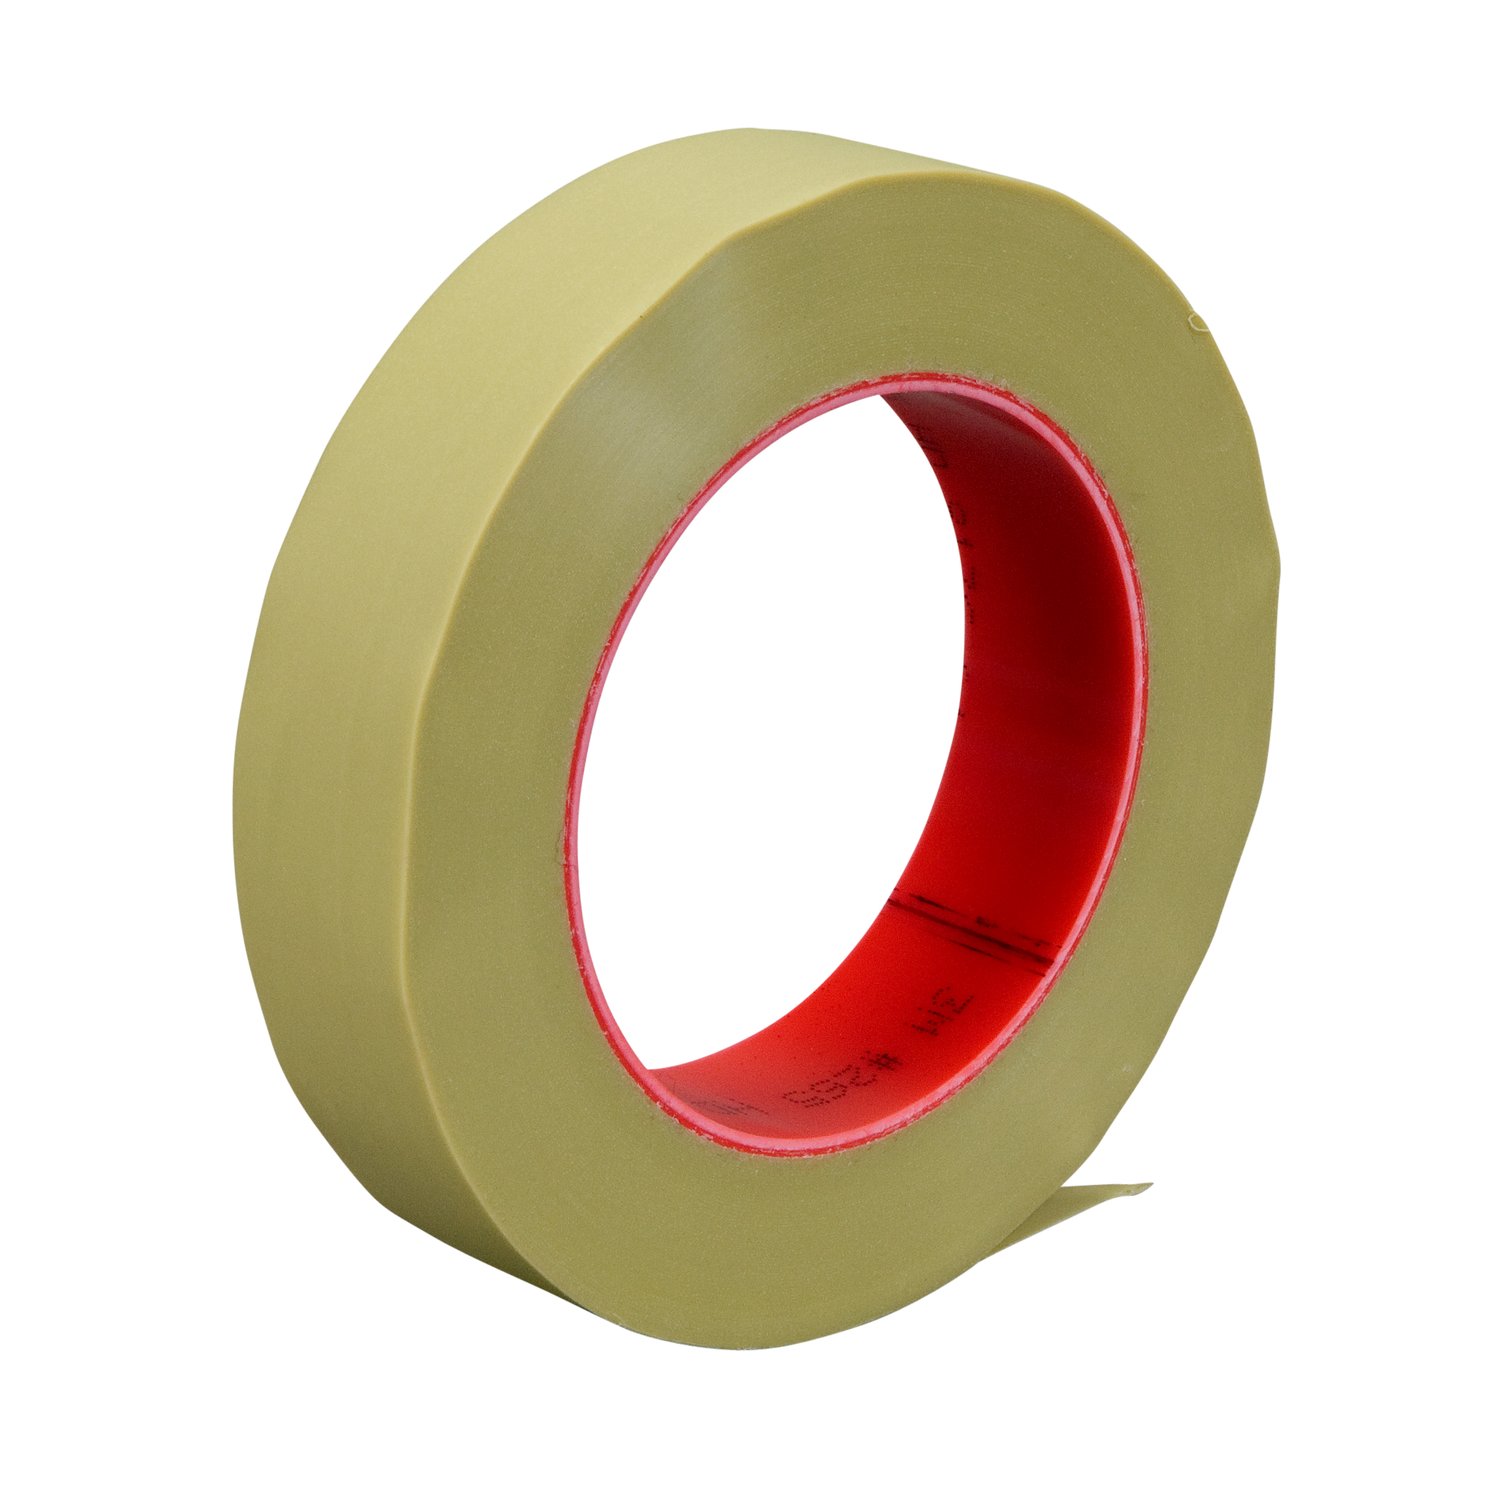 Scotch Removable Fabric Tape FTR-1-CFT, 3/4 in x 180 in